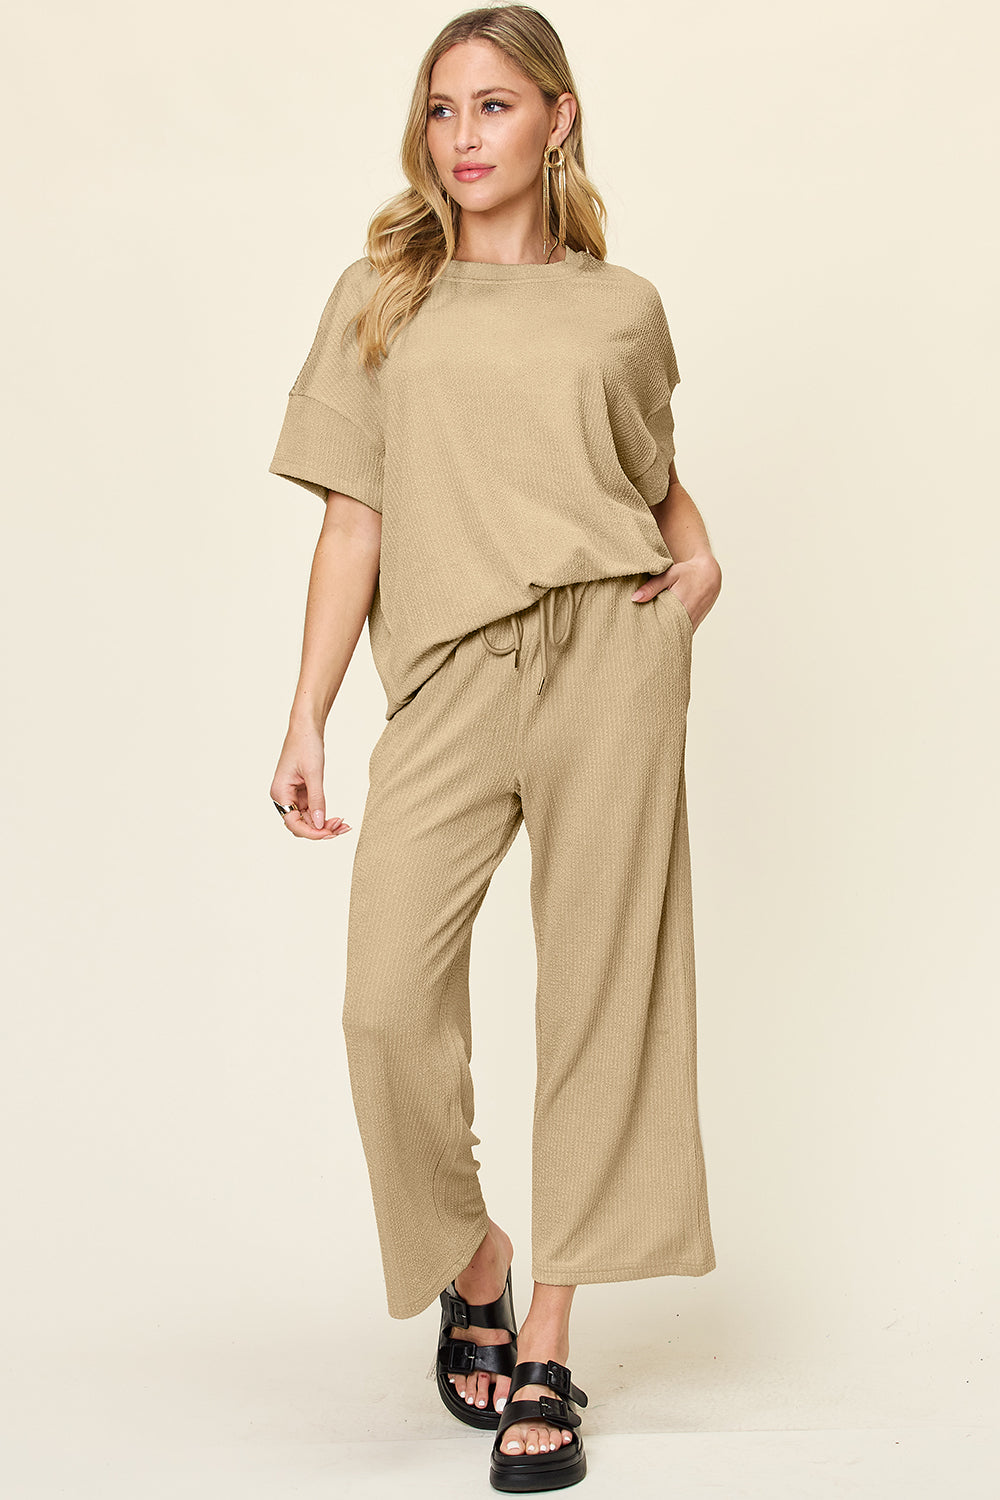 Double Take Texture Round Neck Short Sleeve T-Shirt and Wide Leg Pants